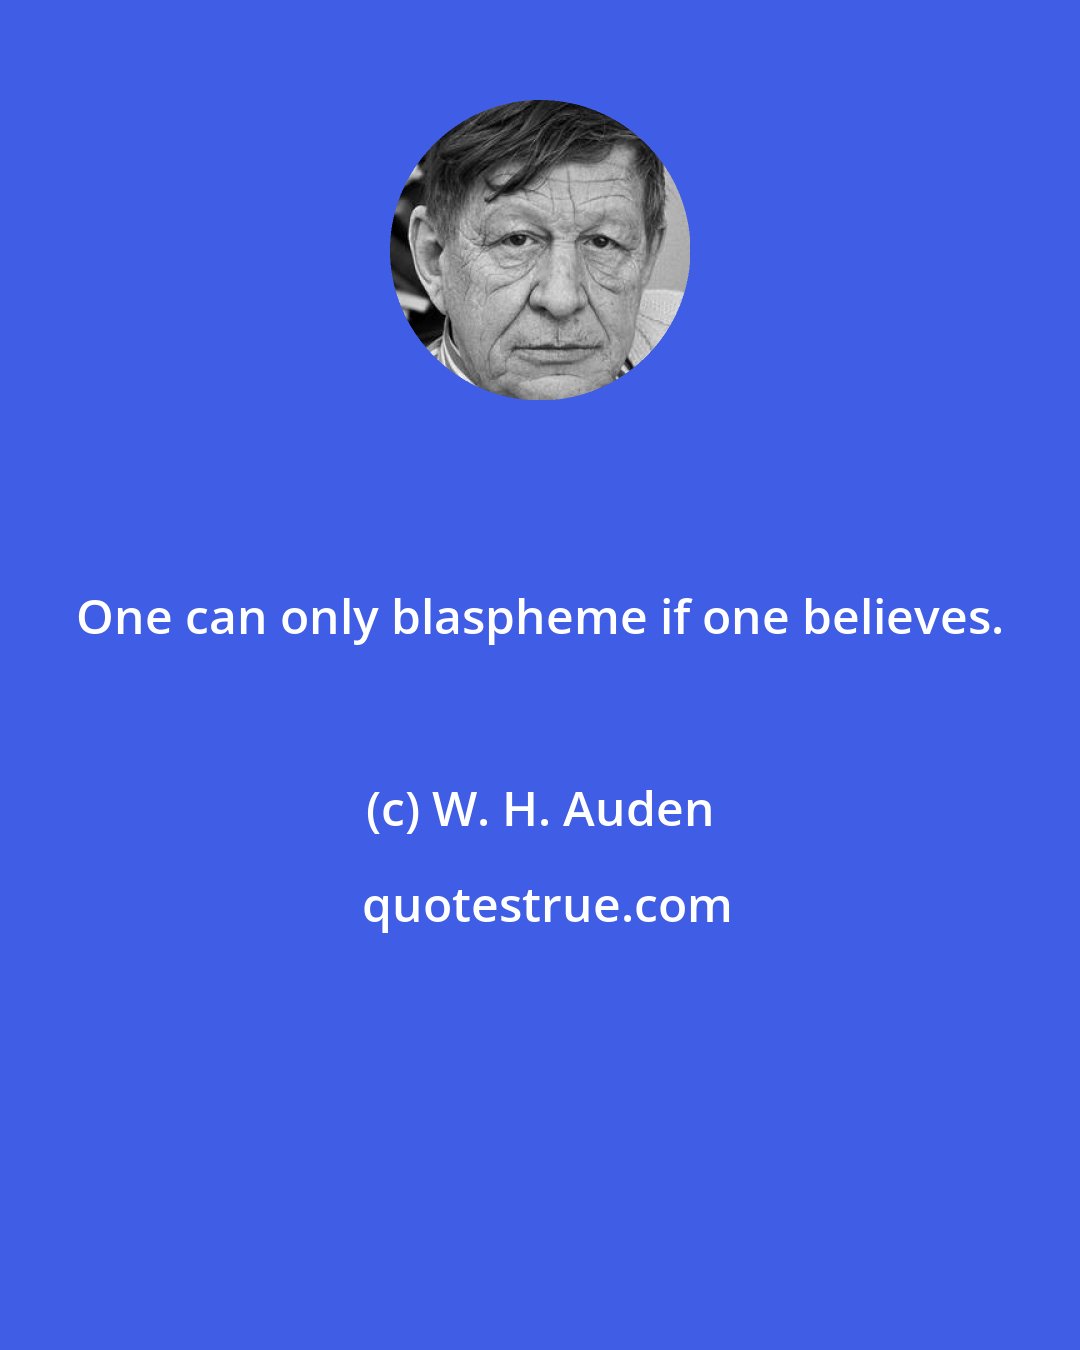 W. H. Auden: One can only blaspheme if one believes.